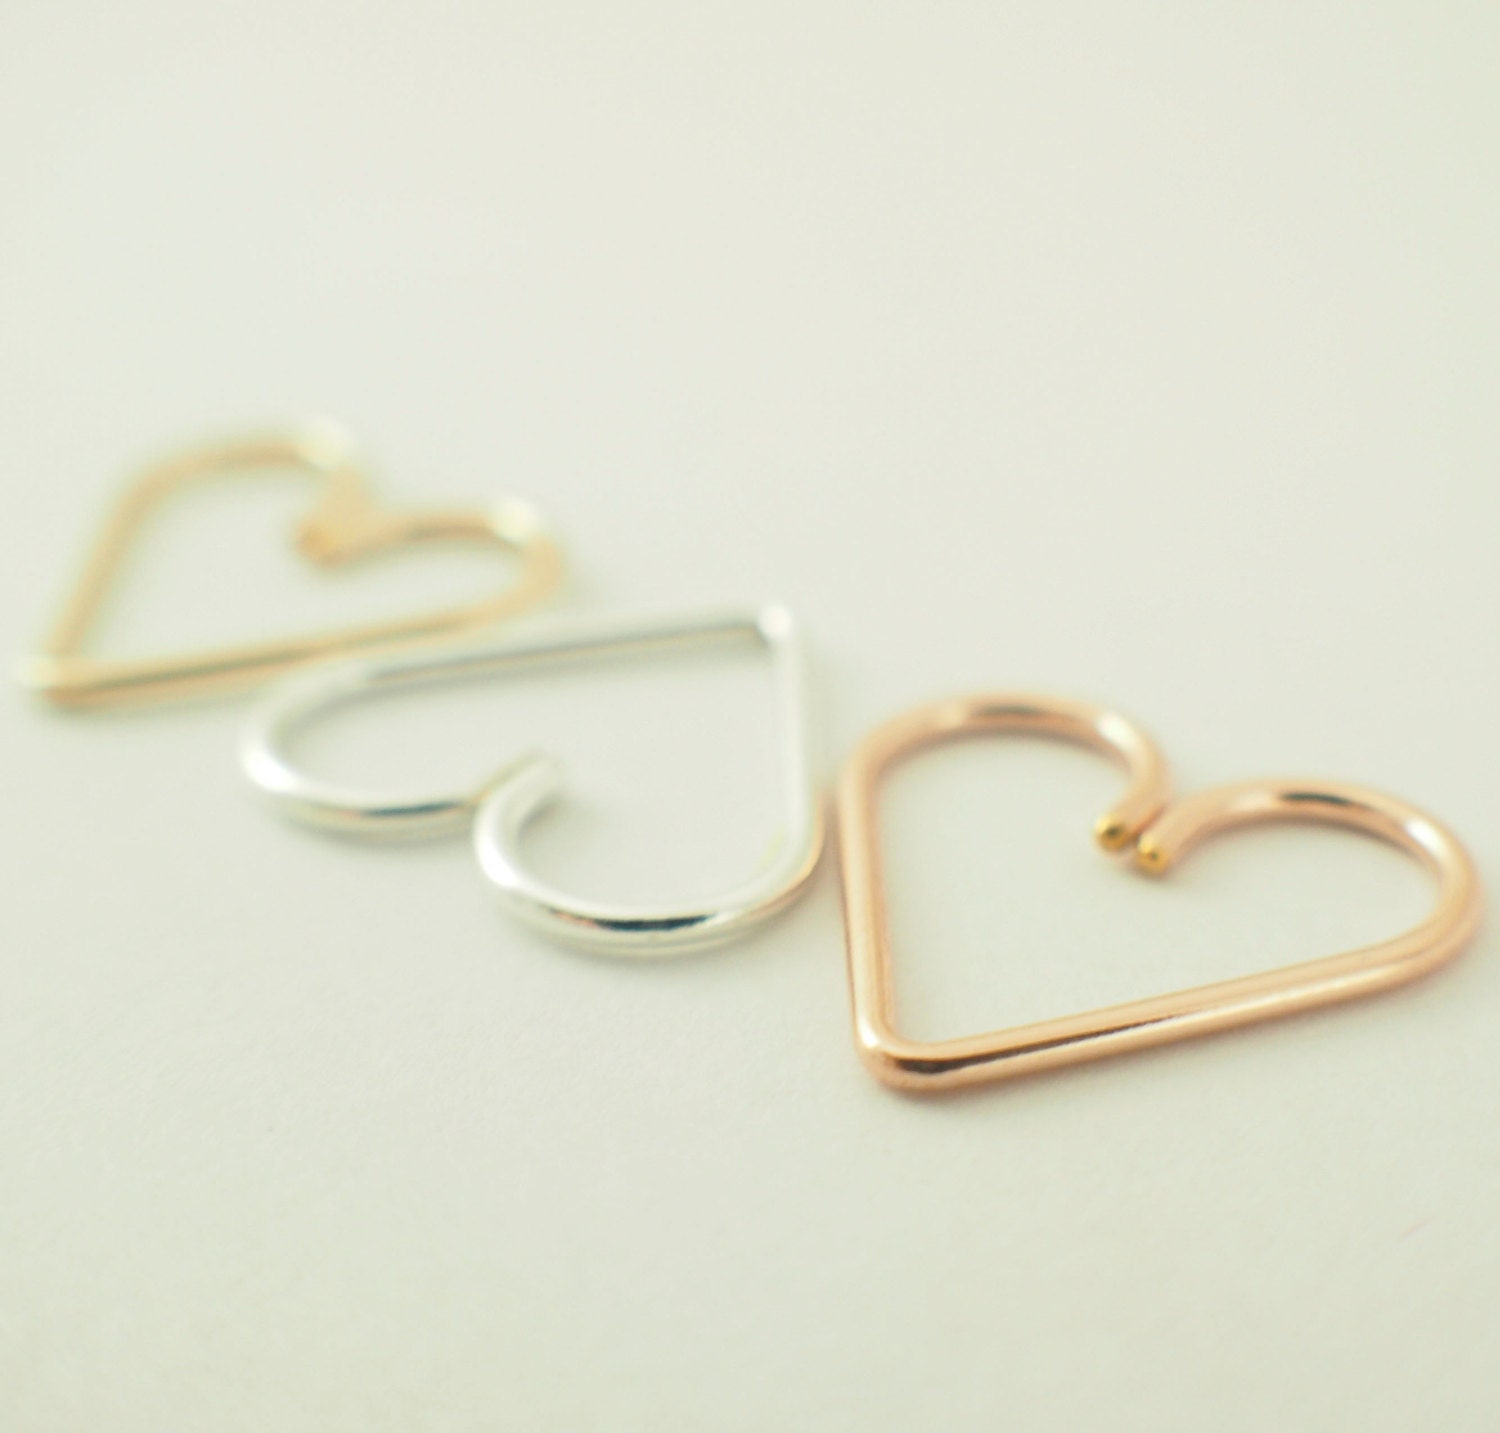 Argentium Silver, Rose Gold Filled, or Yellow Gold Filled - Heart Piercing - Hypo Allergenic - Cartilage Piercing - YOU PICK Metal and Gauge - favmoongirl